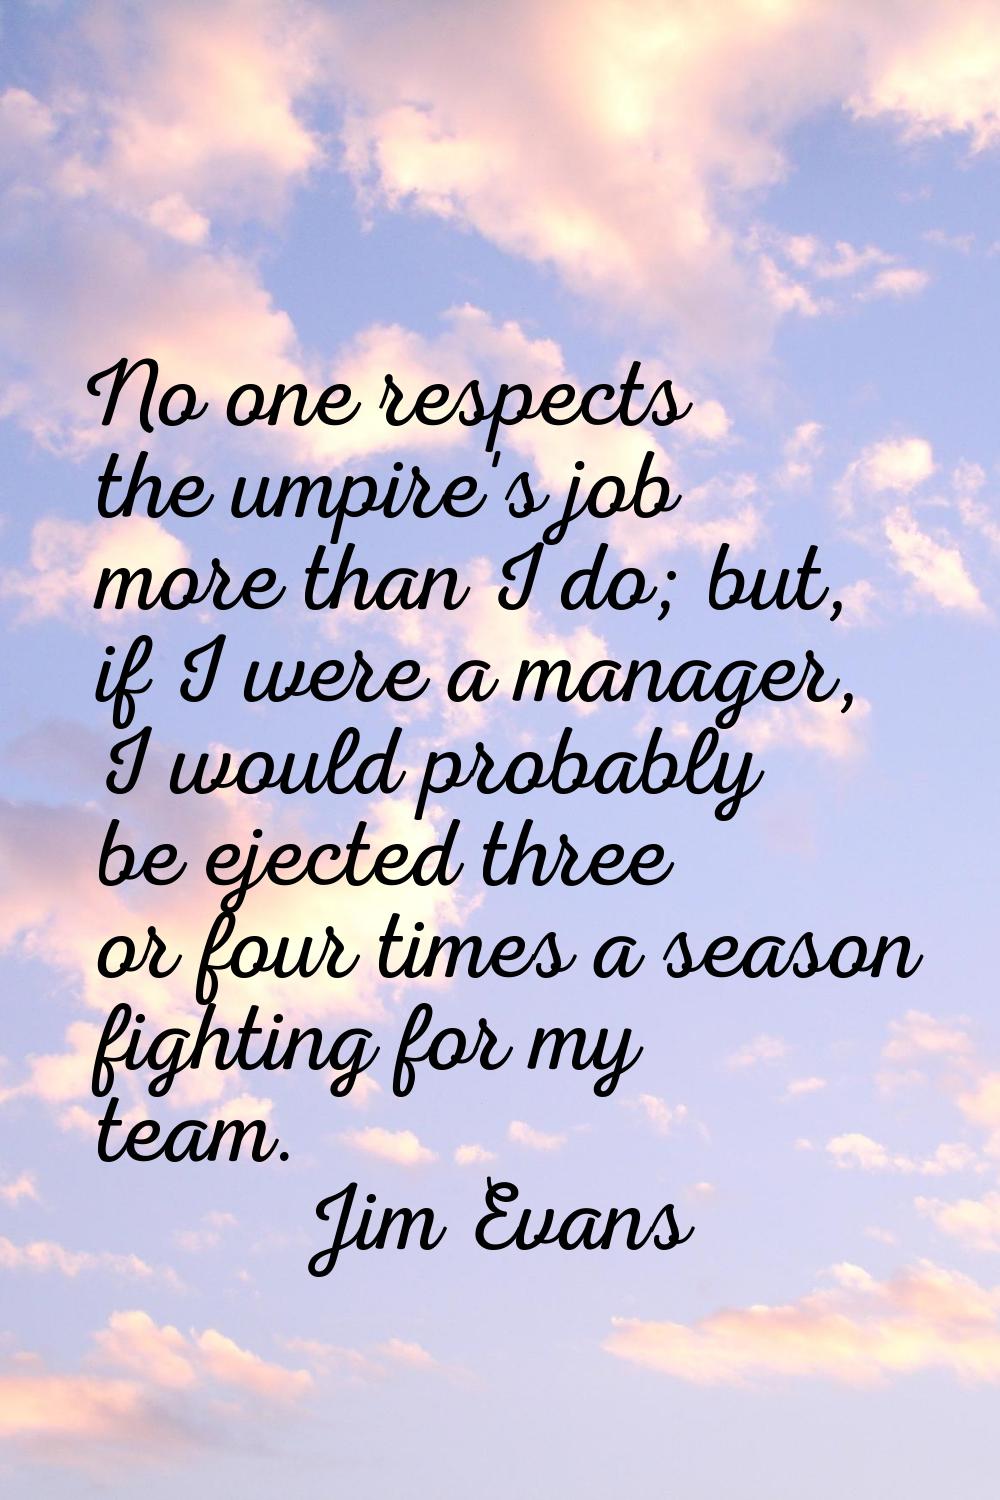 No one respects the umpire's job more than I do; but, if I were a manager, I would probably be ejec